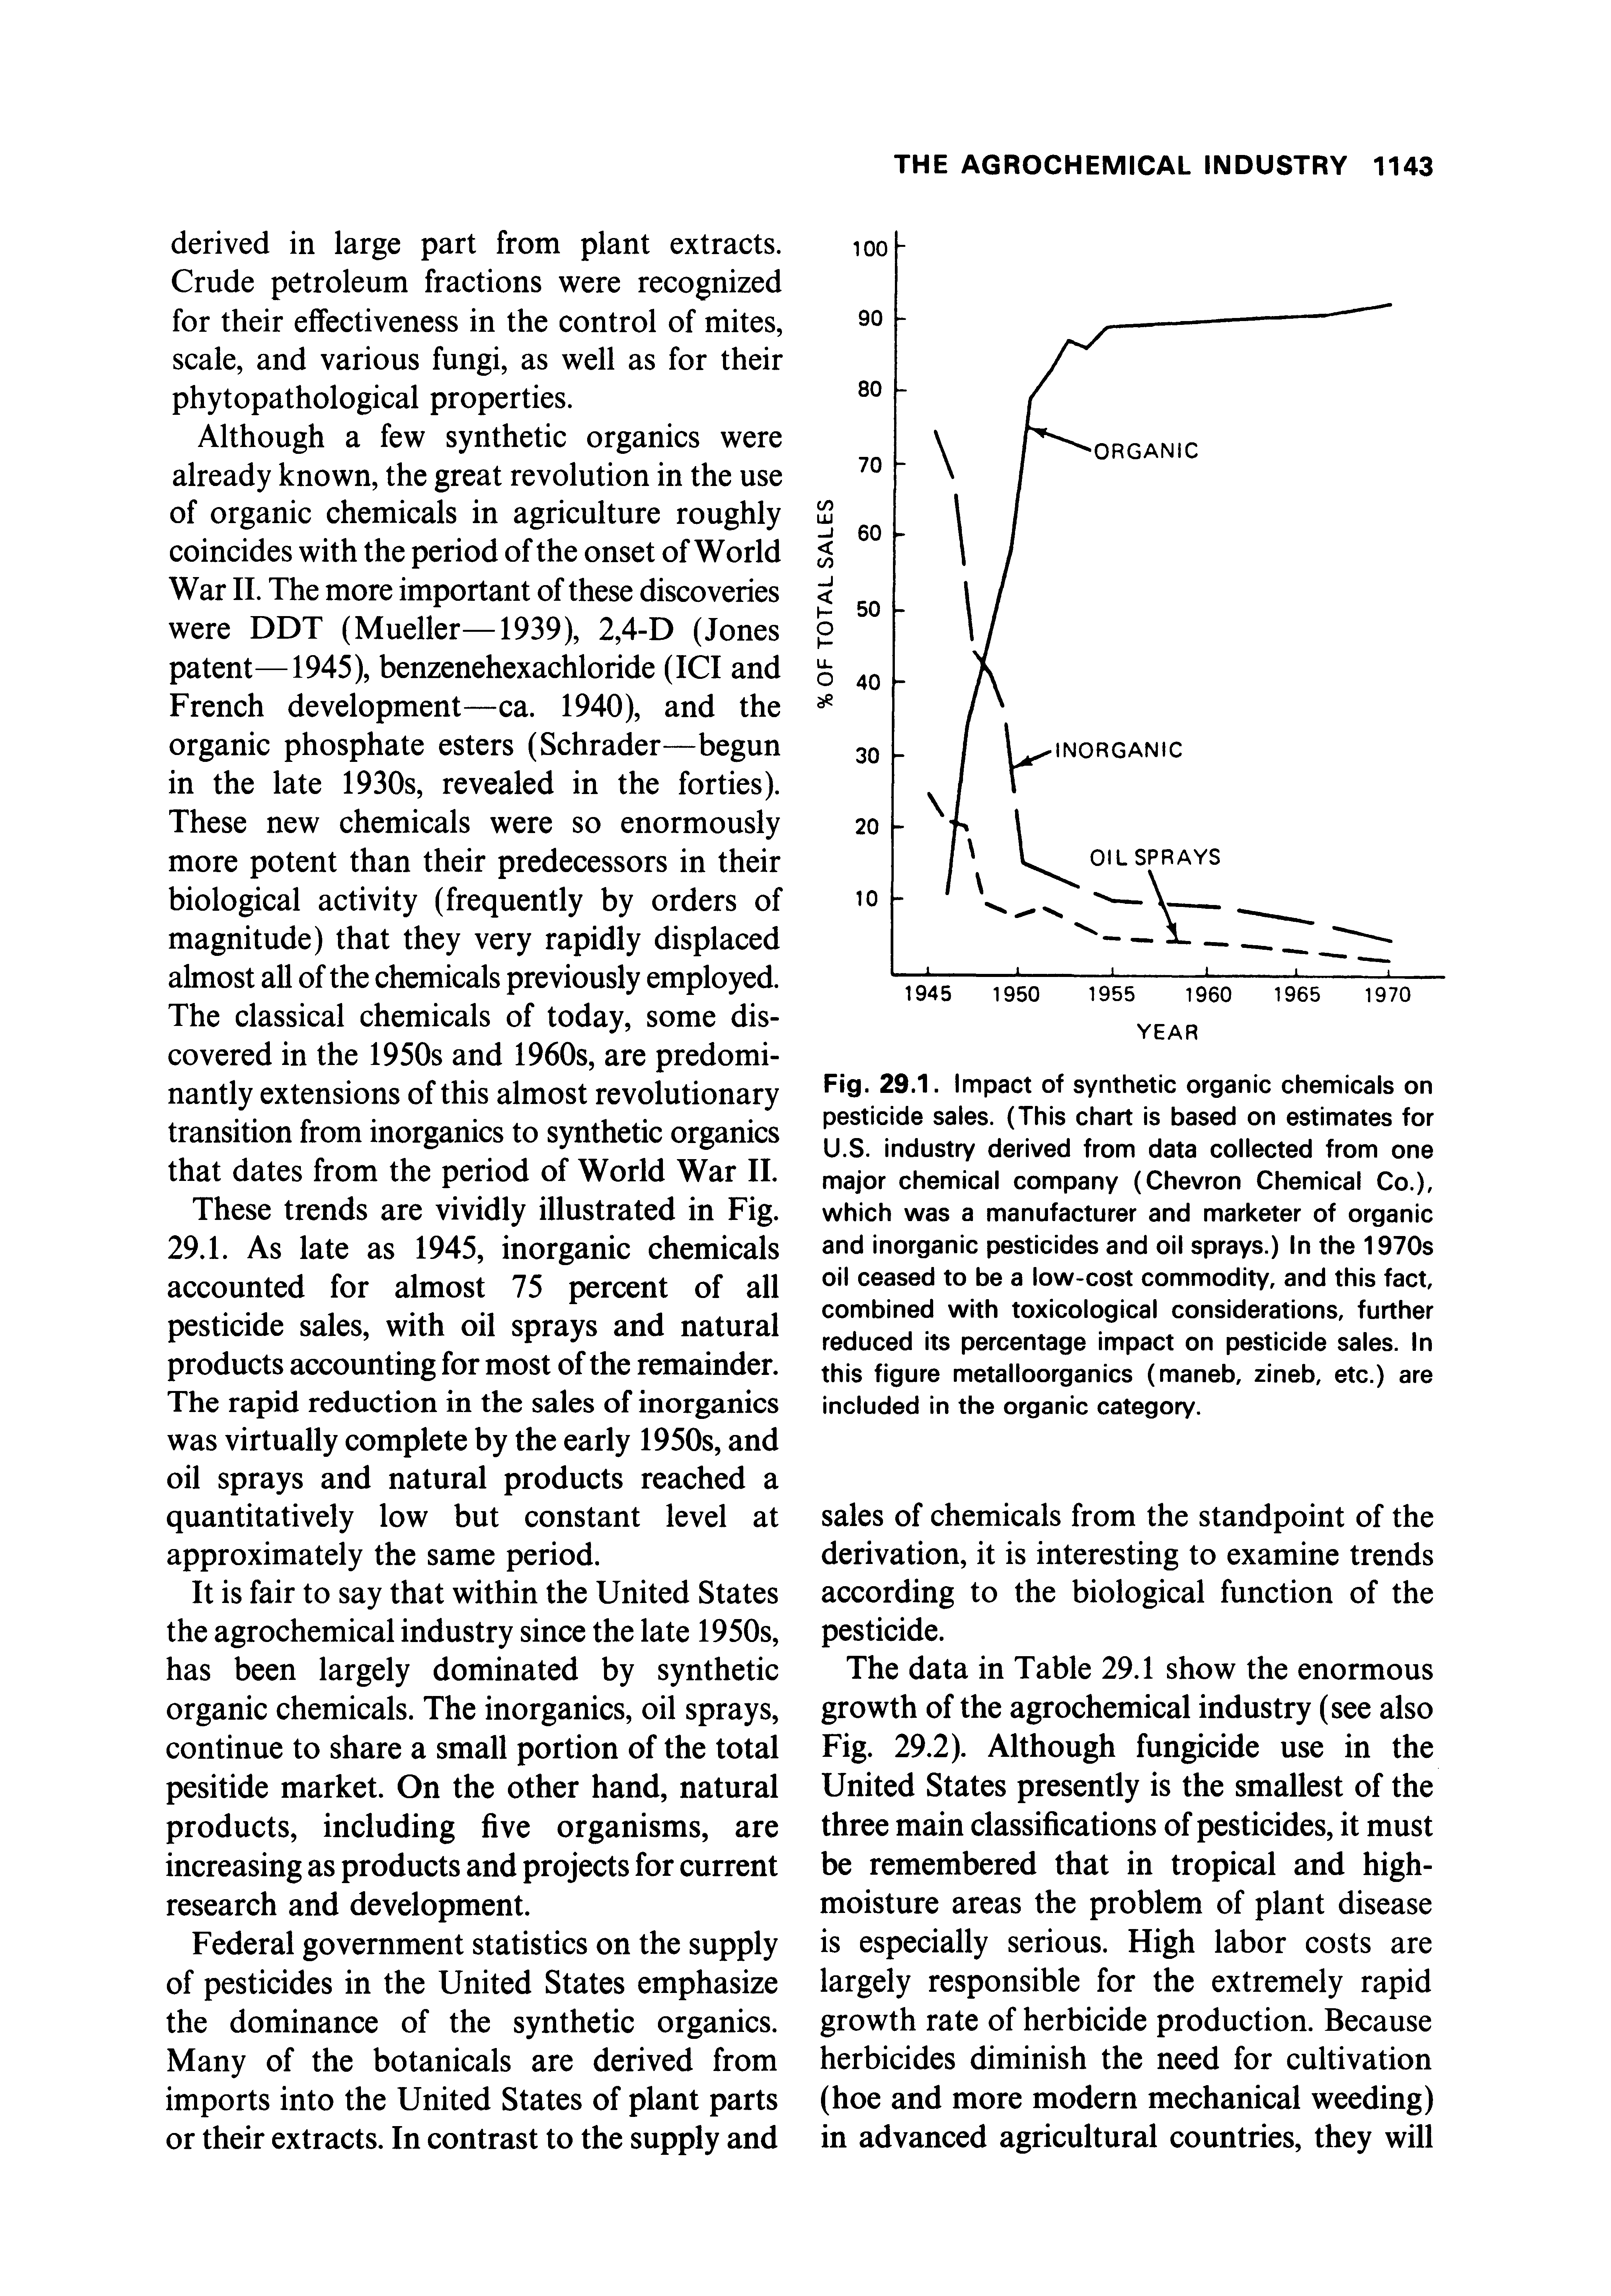 Fig. 29.1. Impact of synthetic organic chemicals on pesticide sales. (This chart is based on estimates for U.S. industry derived from data collected from one major chemical company (Chevron Chemical Co.), which was a manufacturer and marketer of organic and inorganic pesticides and oil sprays.) In the 1970s oil ceased to be a low-cost commodity, and this fact, combined with toxicological considerations, further reduced its percentage impact on pesticide sales. In this figure metal Inorganics (maneb, zineb, etc.) are included in the organic category.